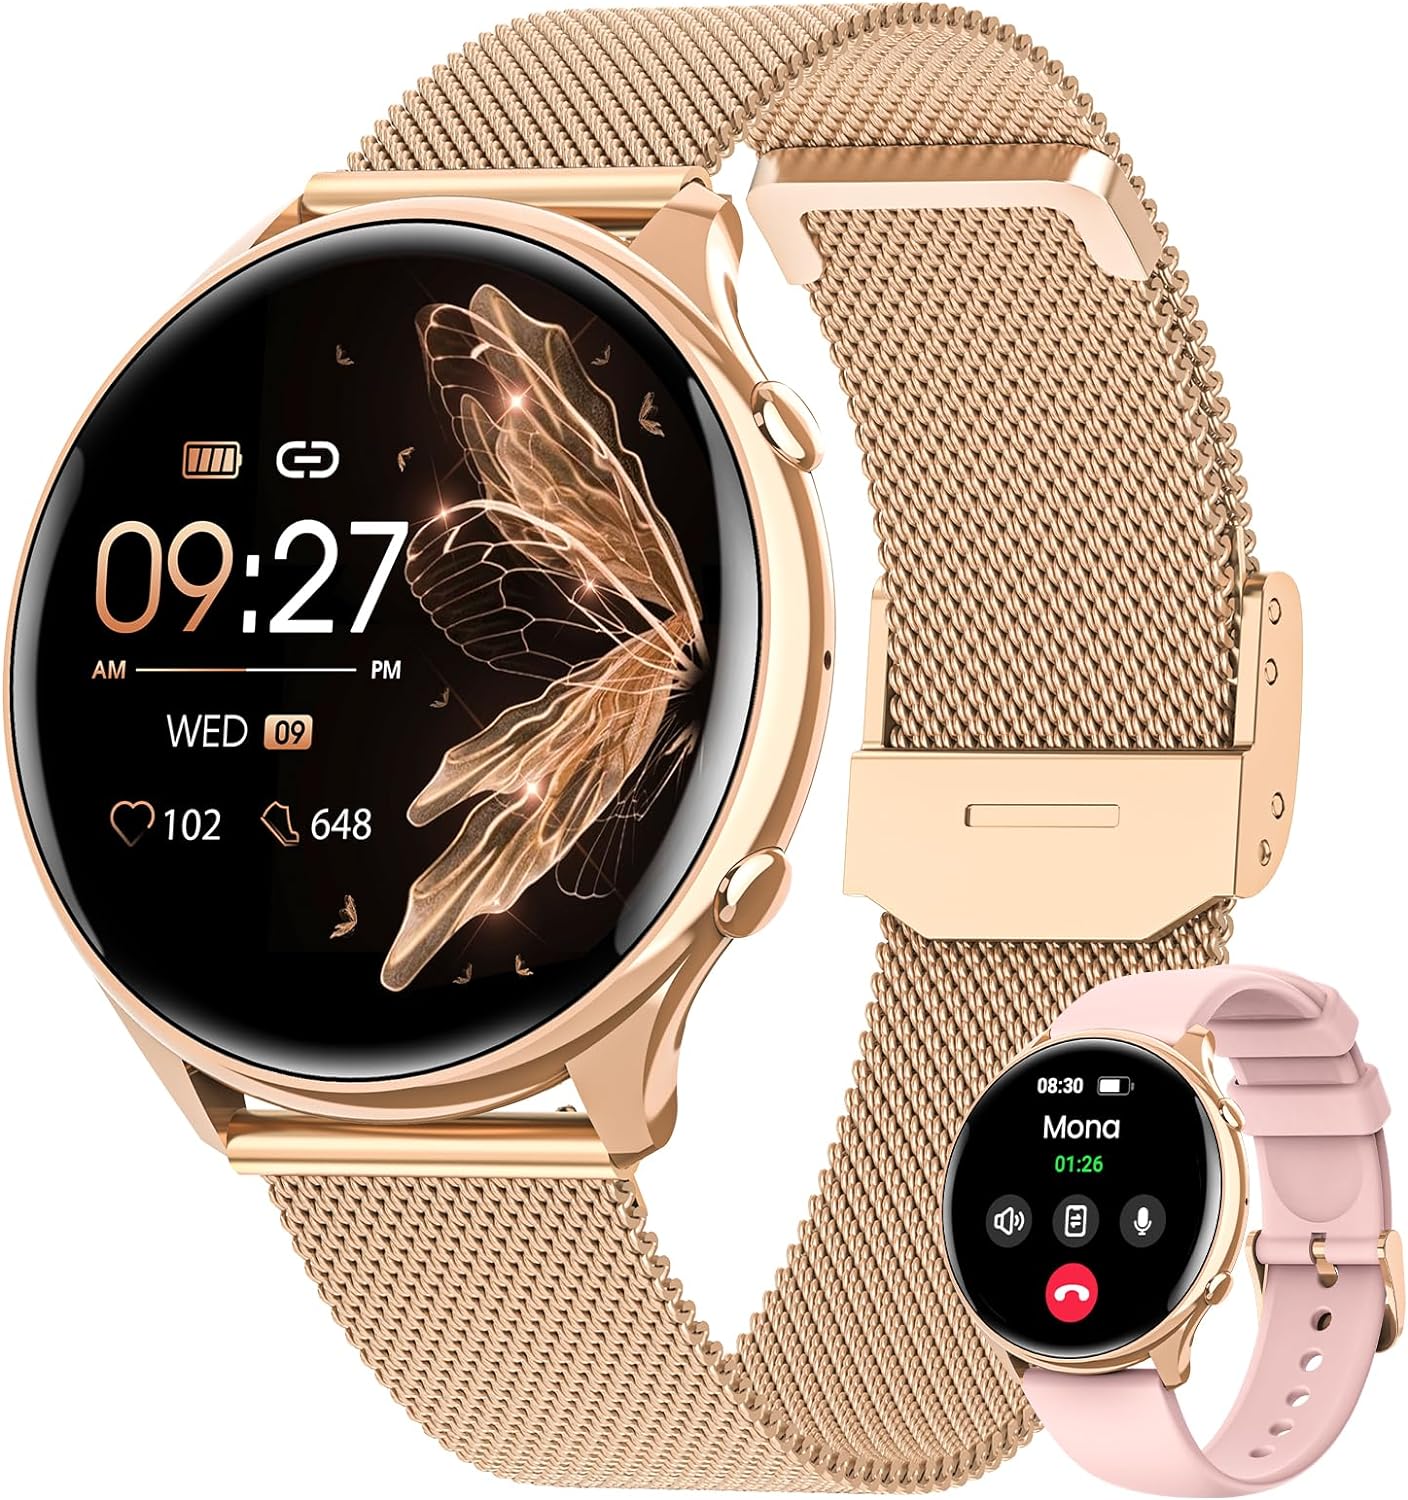 AIMIUVEI Womens Smartwatch with Phone Function, 1.39 Inch HD Touch Screen, Fitness Watch with 120+ Sports Modes, Menstrual Cycle, SpO2 Heart Rate Monitor, Sleep Monitor, Pedometer, Watch for iOS,